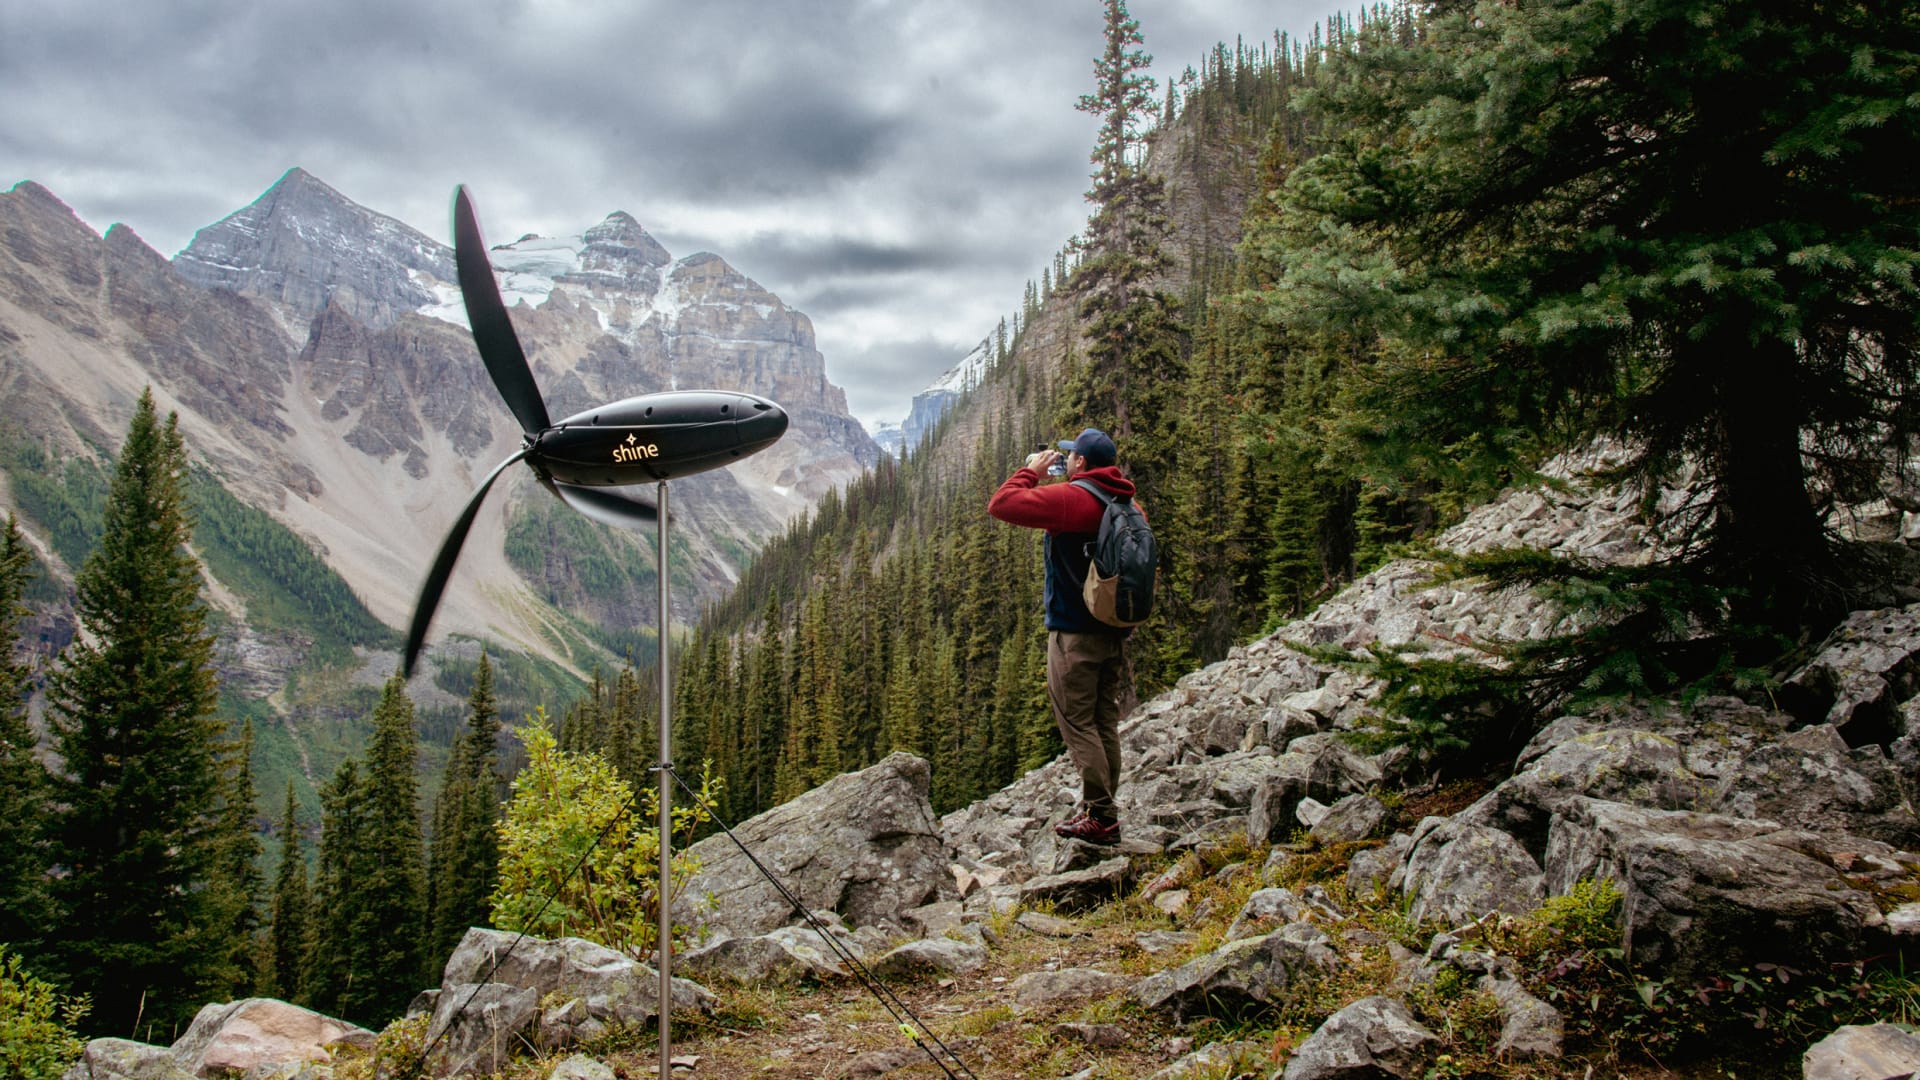 A portable wind turbine that fits in your backpack? Yes please